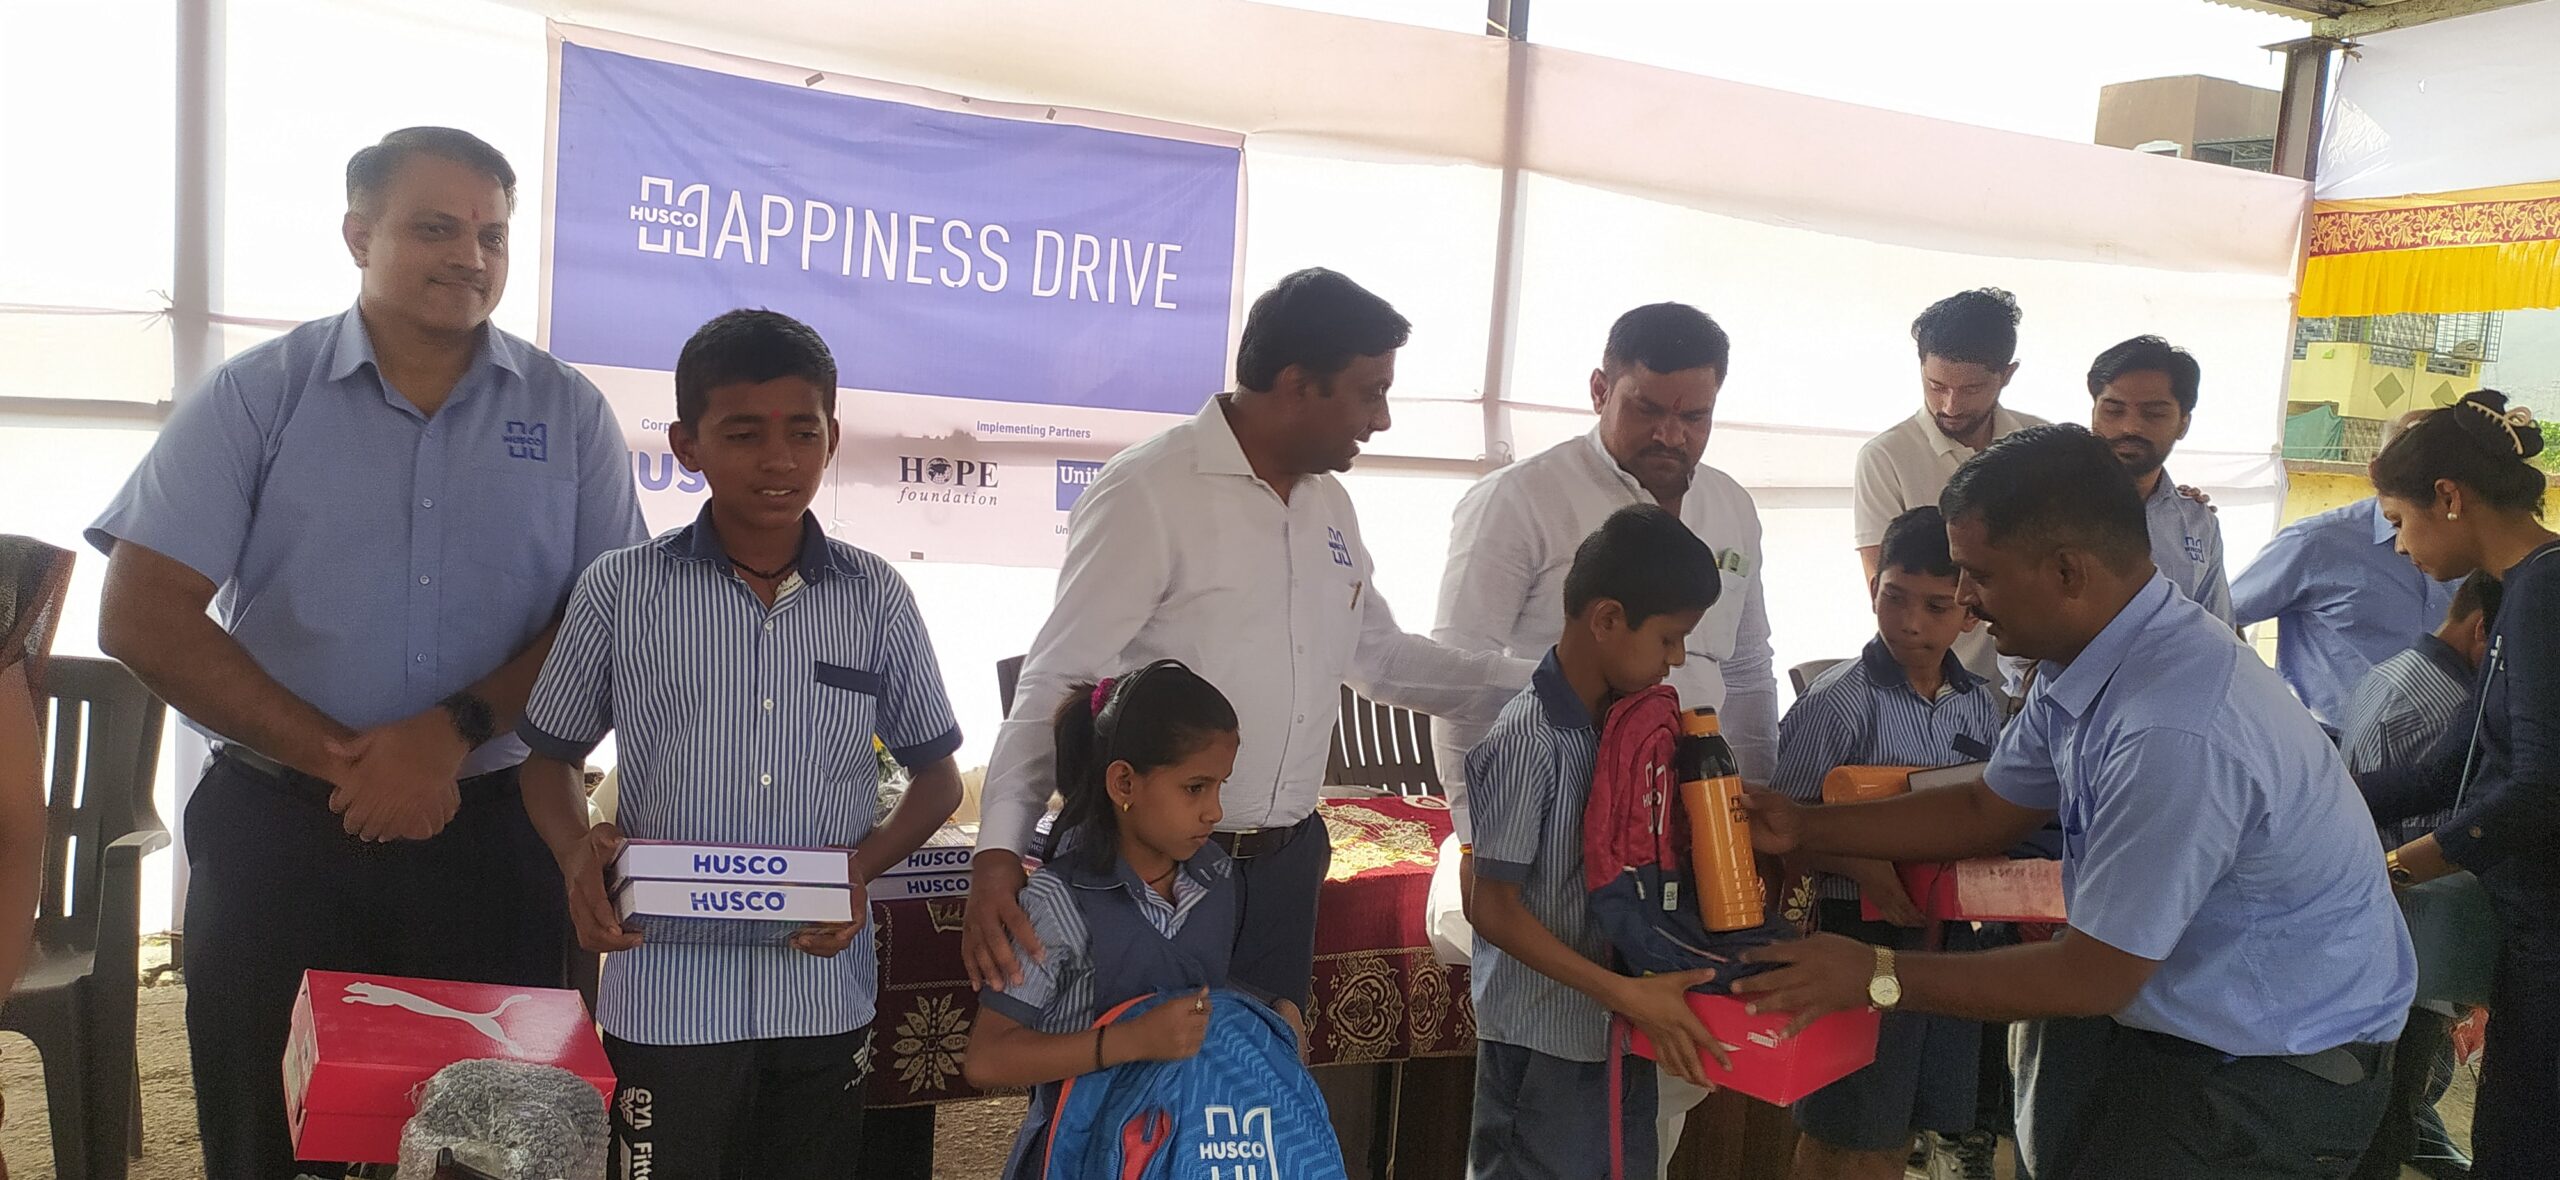 Students from ZP school, Pune, receiving educational resources under UW India’s Happiness Drive.